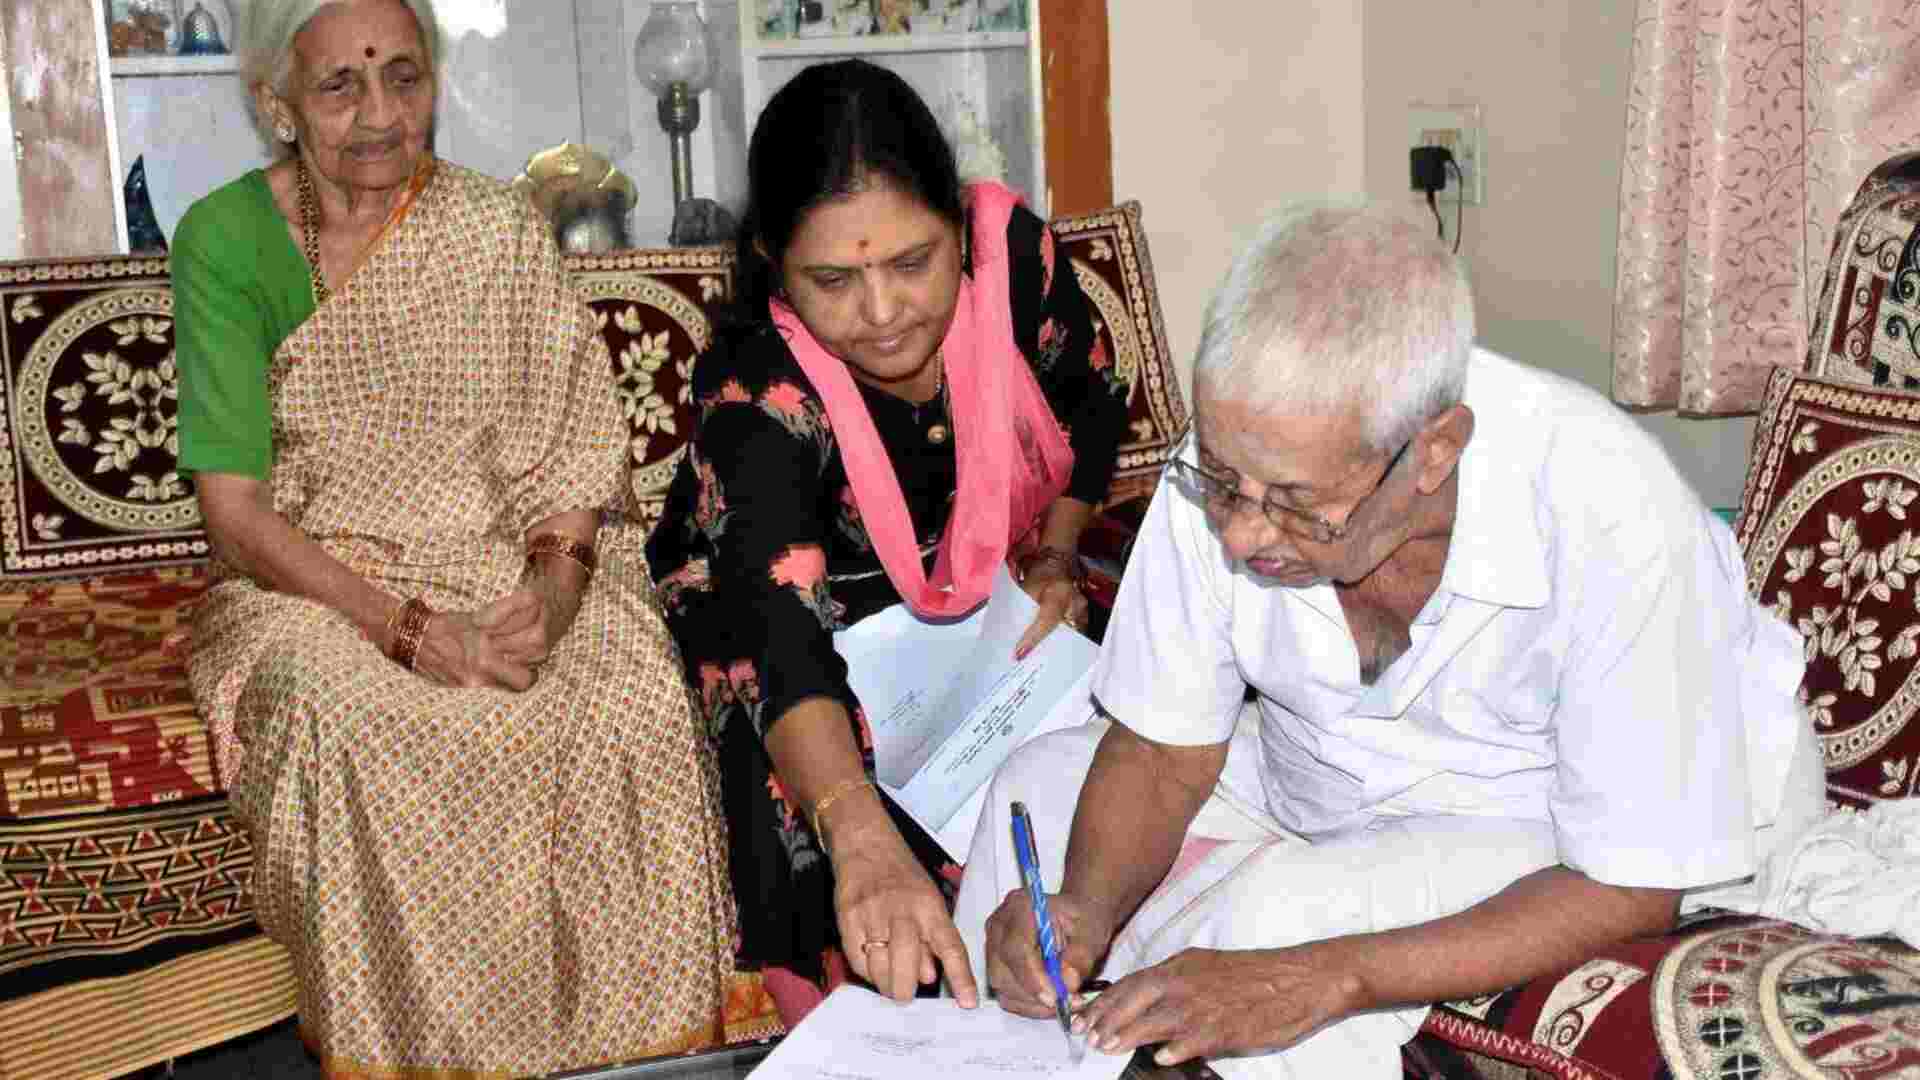 Mumbai: Home-Voting Introduced For Elderly And People With Disabilities In Landmark Election Move